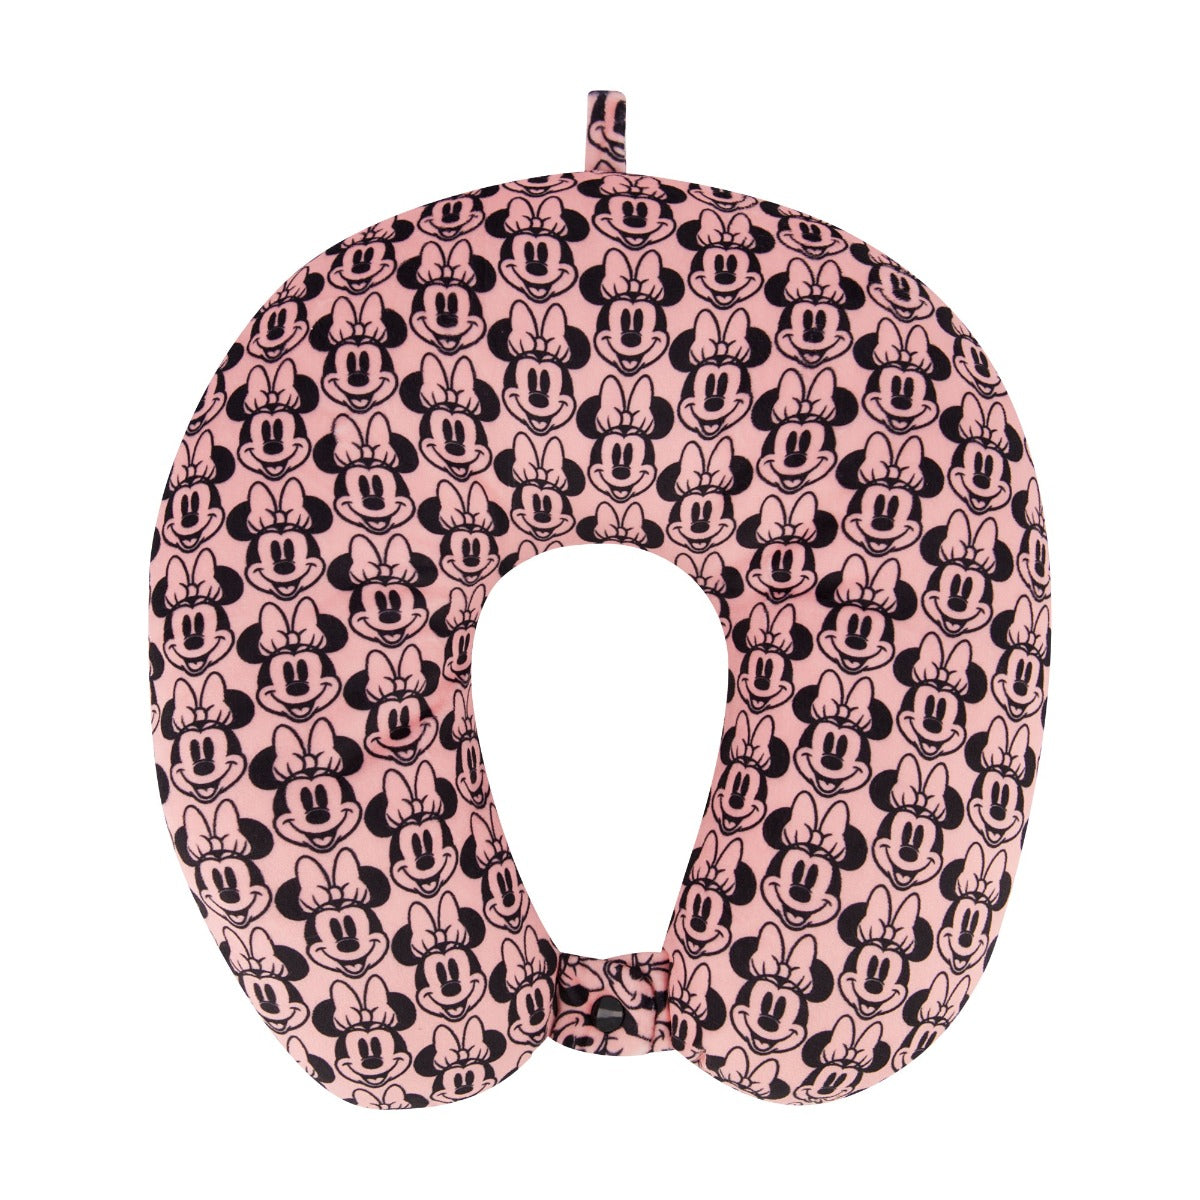 Ful disney minnie mouse neck pillow pink and black - best comfortable supportive travel pillows 